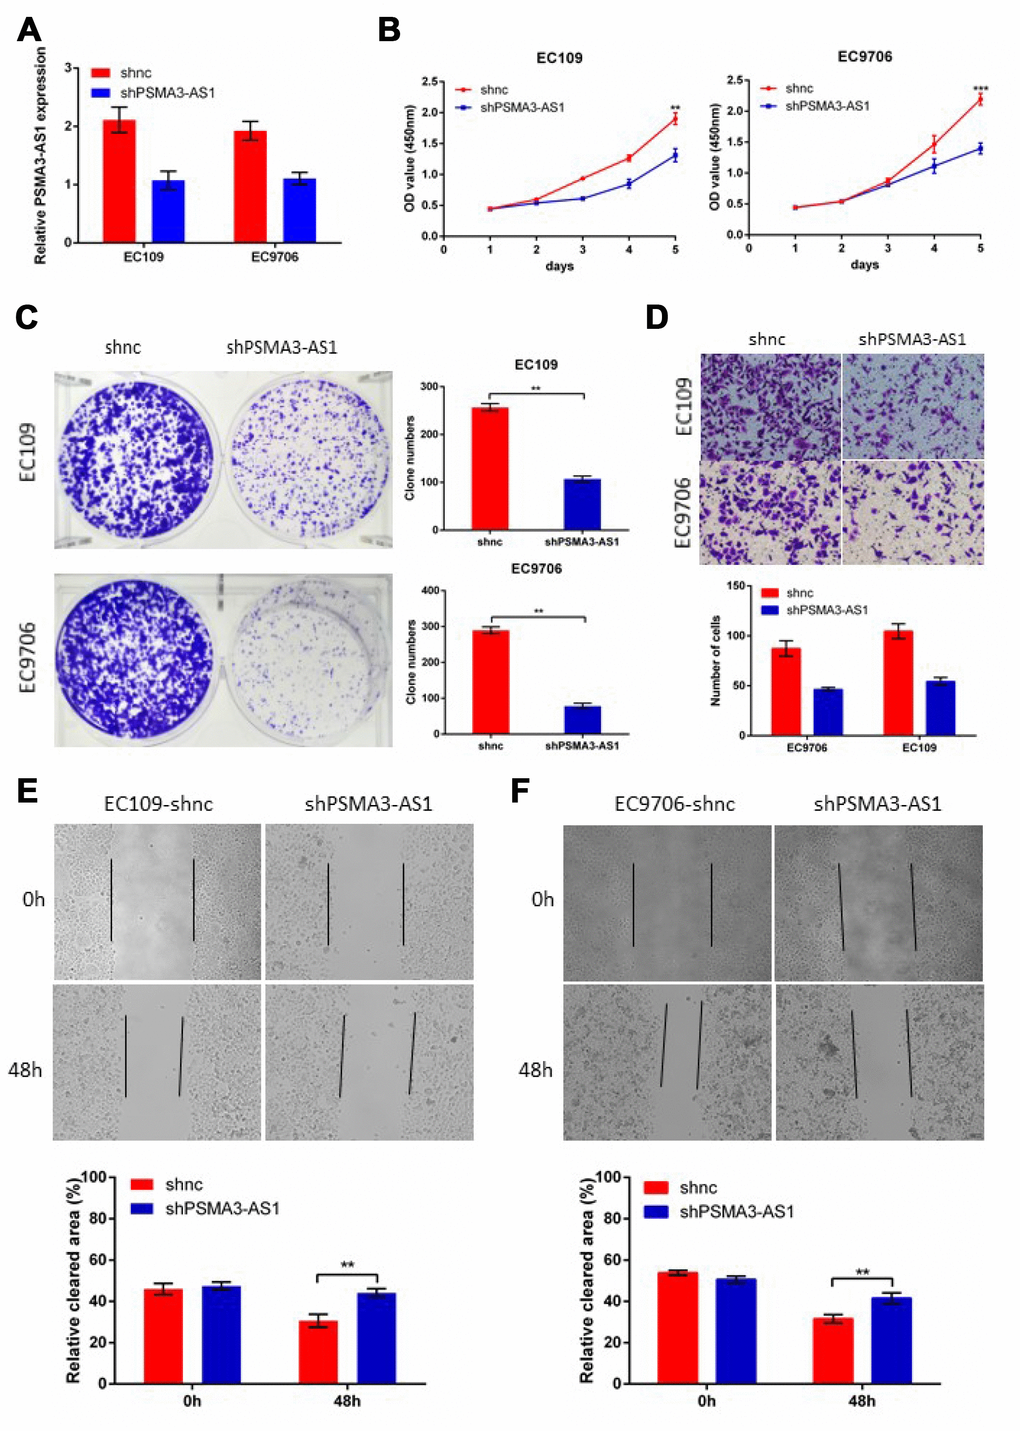 Decreased PSMA3-AS1 expression inhibits ESCC cell proliferation, migration, and invasion in vitro. (A) PSMA3-AS1 expression in ESCC EC9706 and EC109 cells was modified by shRNA transfection. (B) and (C) Cancer cell proliferation was measured using CCK-8 (B) and clone formation assays (C). (D) Cancer cell invasion was measured using transwell assay. (E) Cancer cell migration was measured by using wound healing assay. The data are represented as the mean ± SD, n=3. *p 